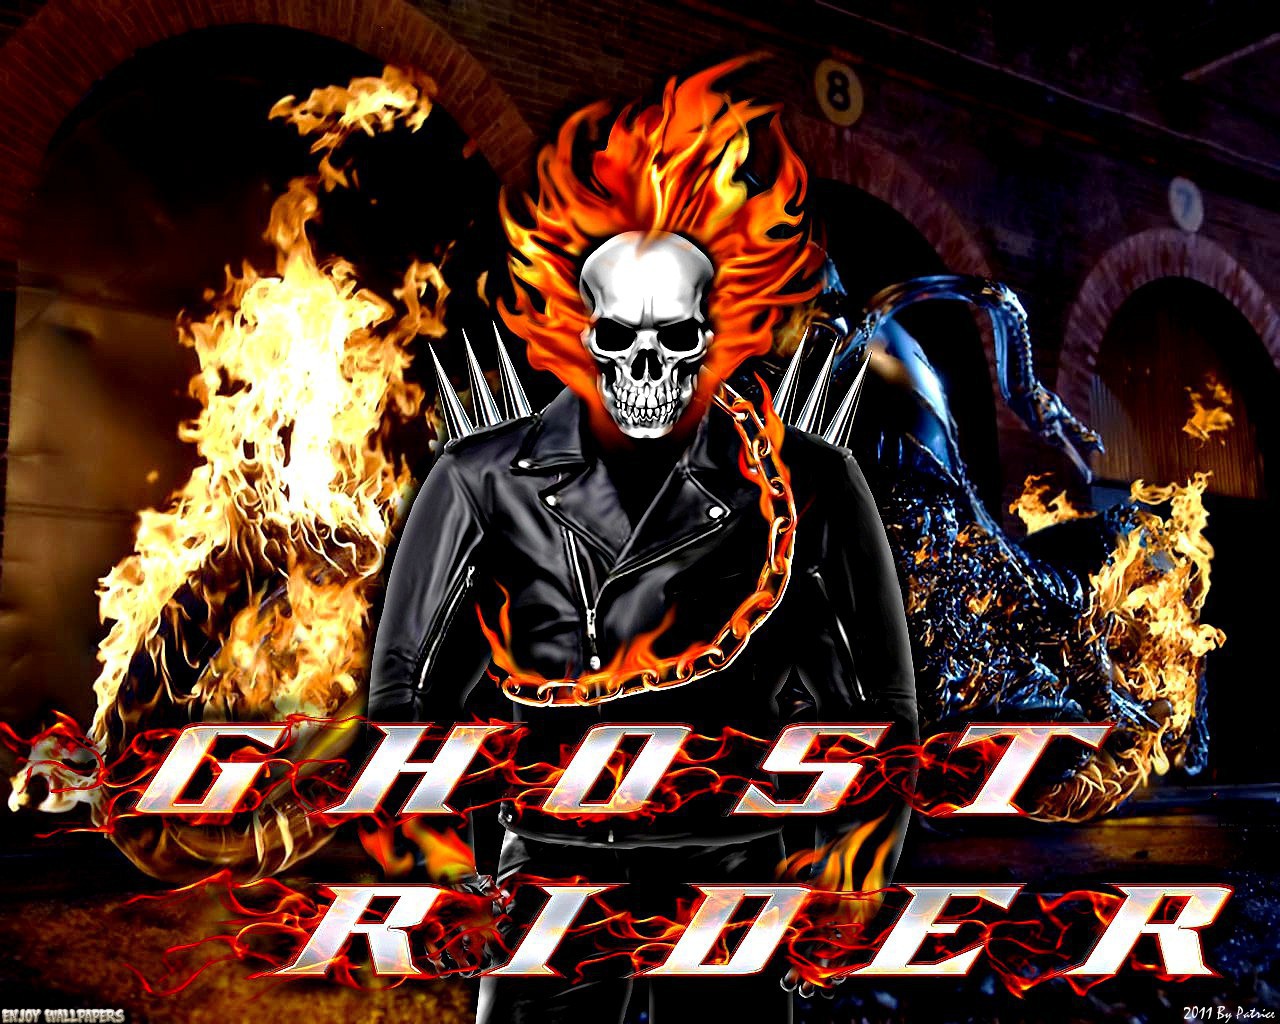  wallpaper wallpaper ghost rider 2 ghost rider hd wallpapers ghost 1280x1024